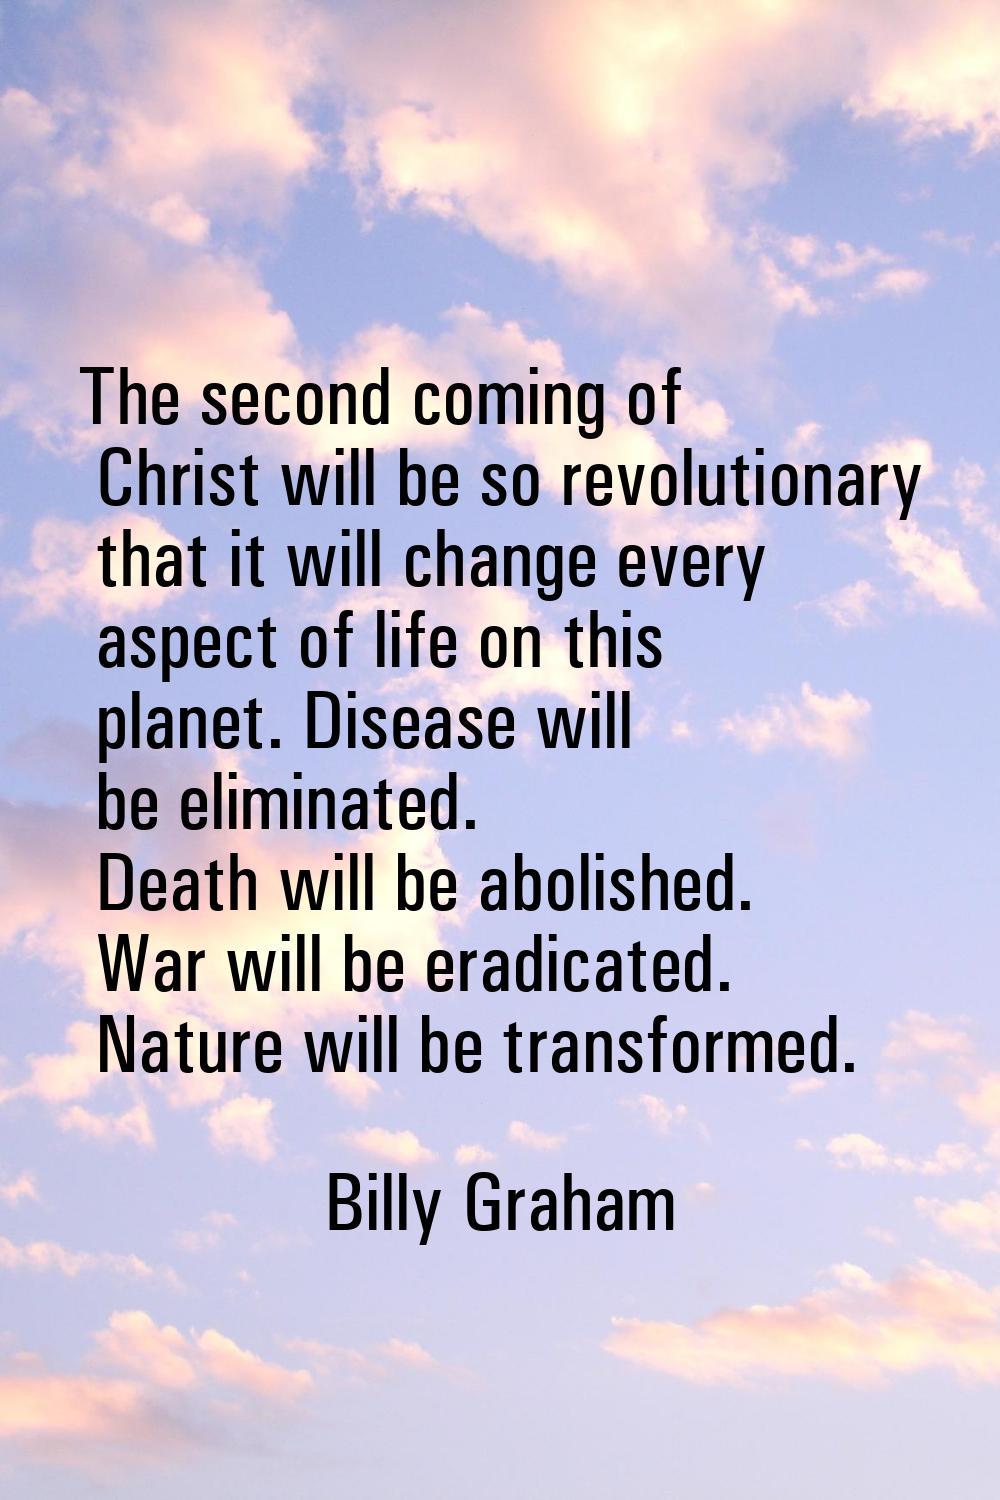 The second coming of Christ will be so revolutionary that it will change every aspect of life on th